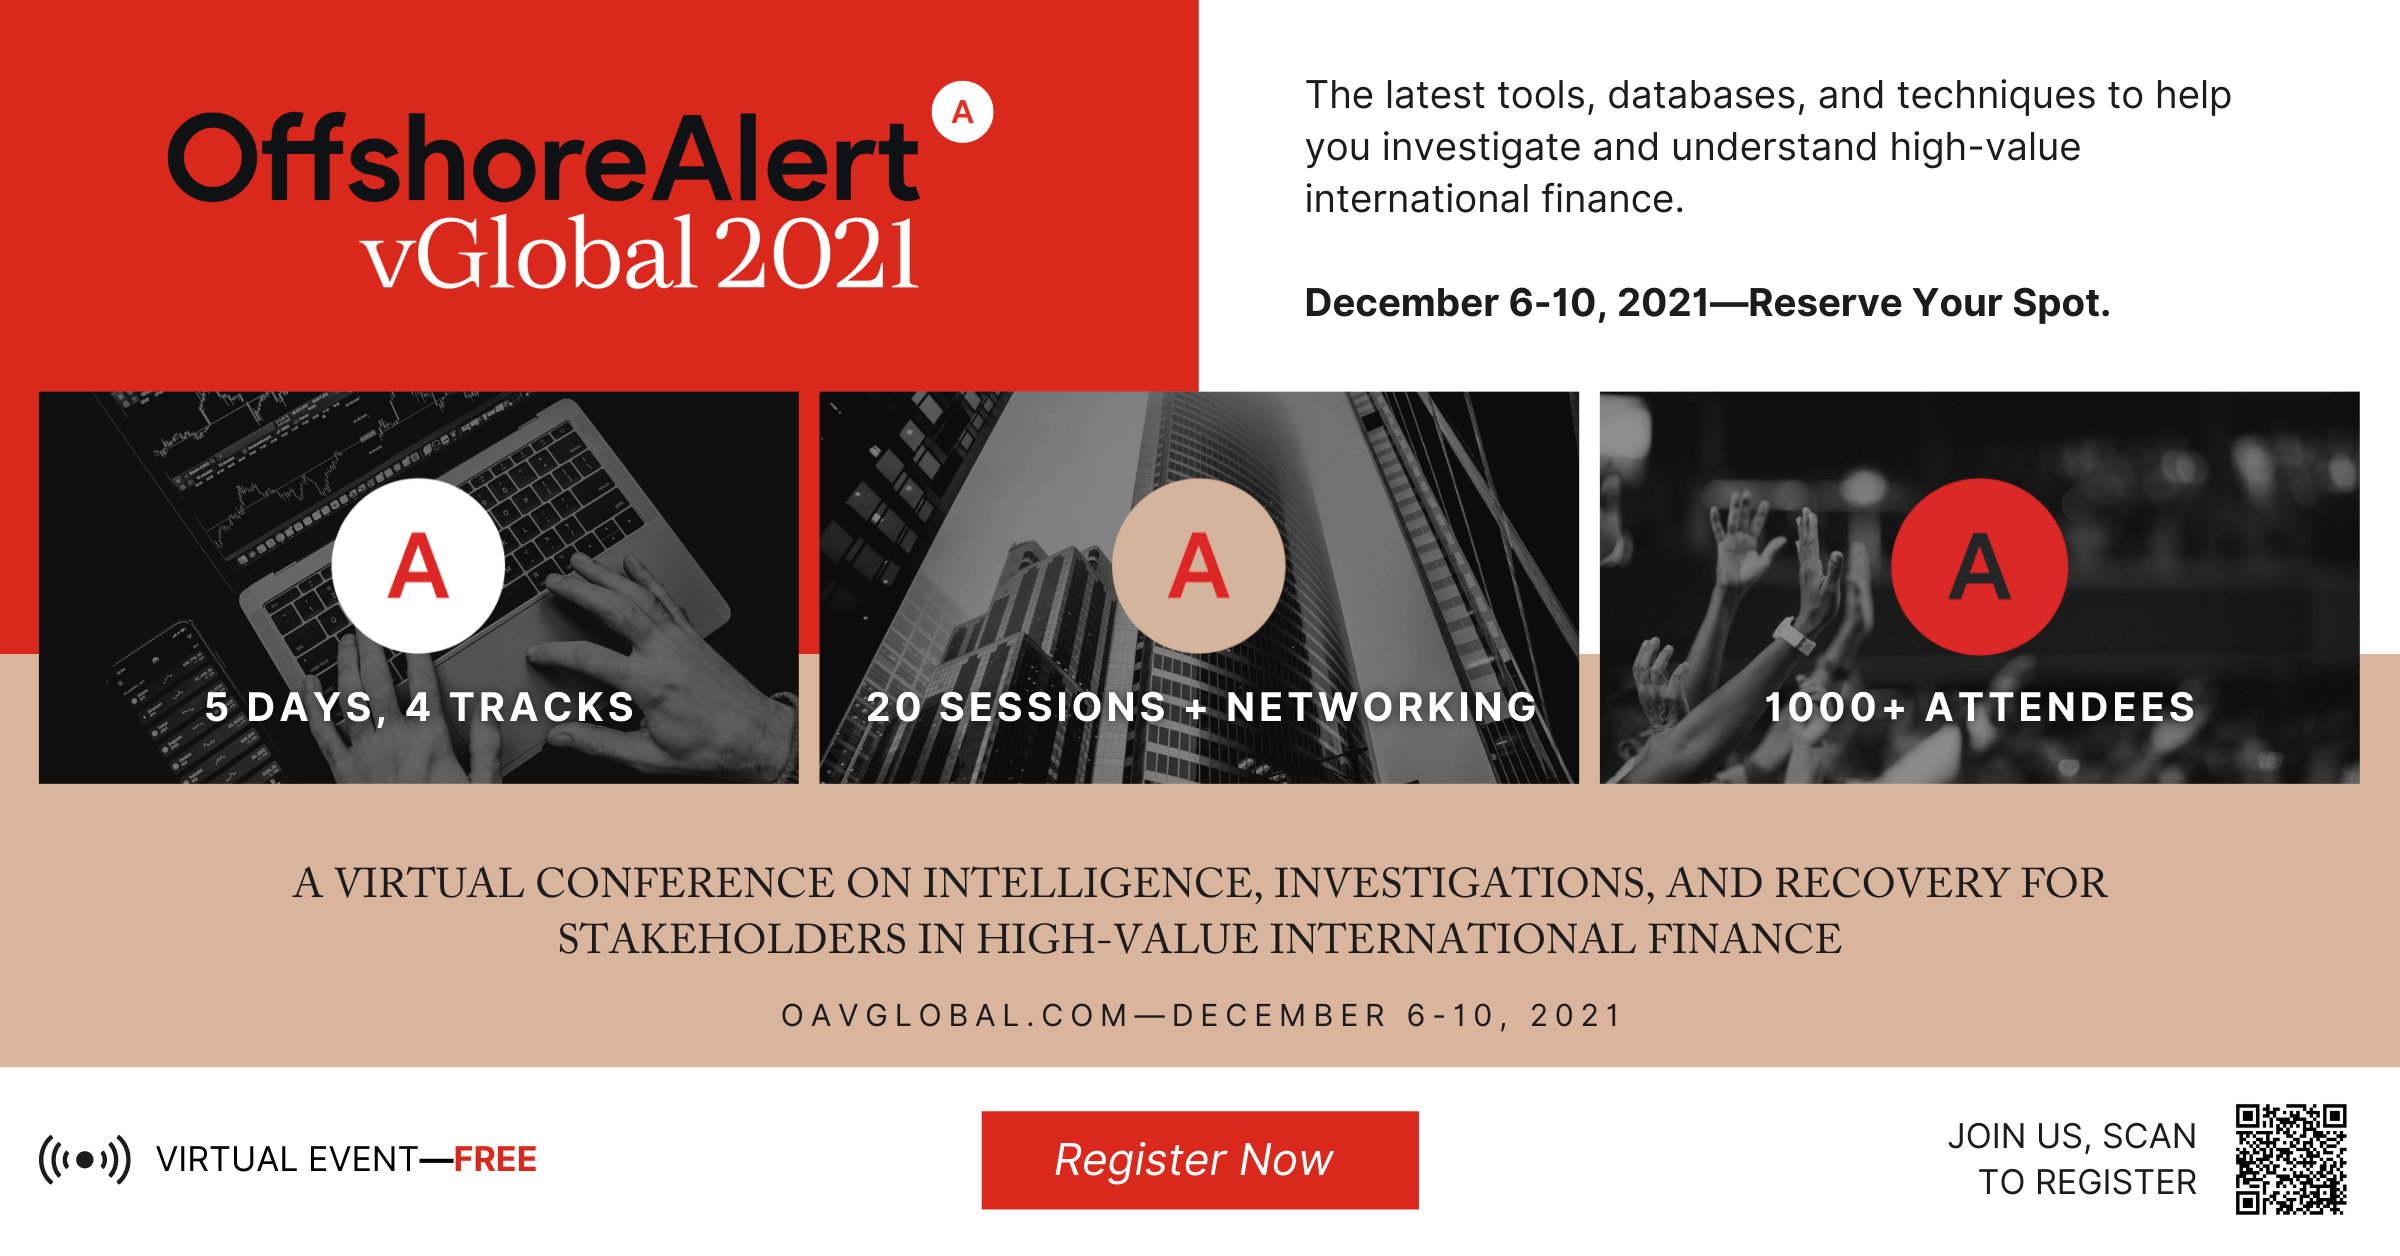 The latest tools, databases, and techniques to help you investigate and understand high-value international finance will be on display at next month's week-long OffshoreAlert vGlobal virtual conference.